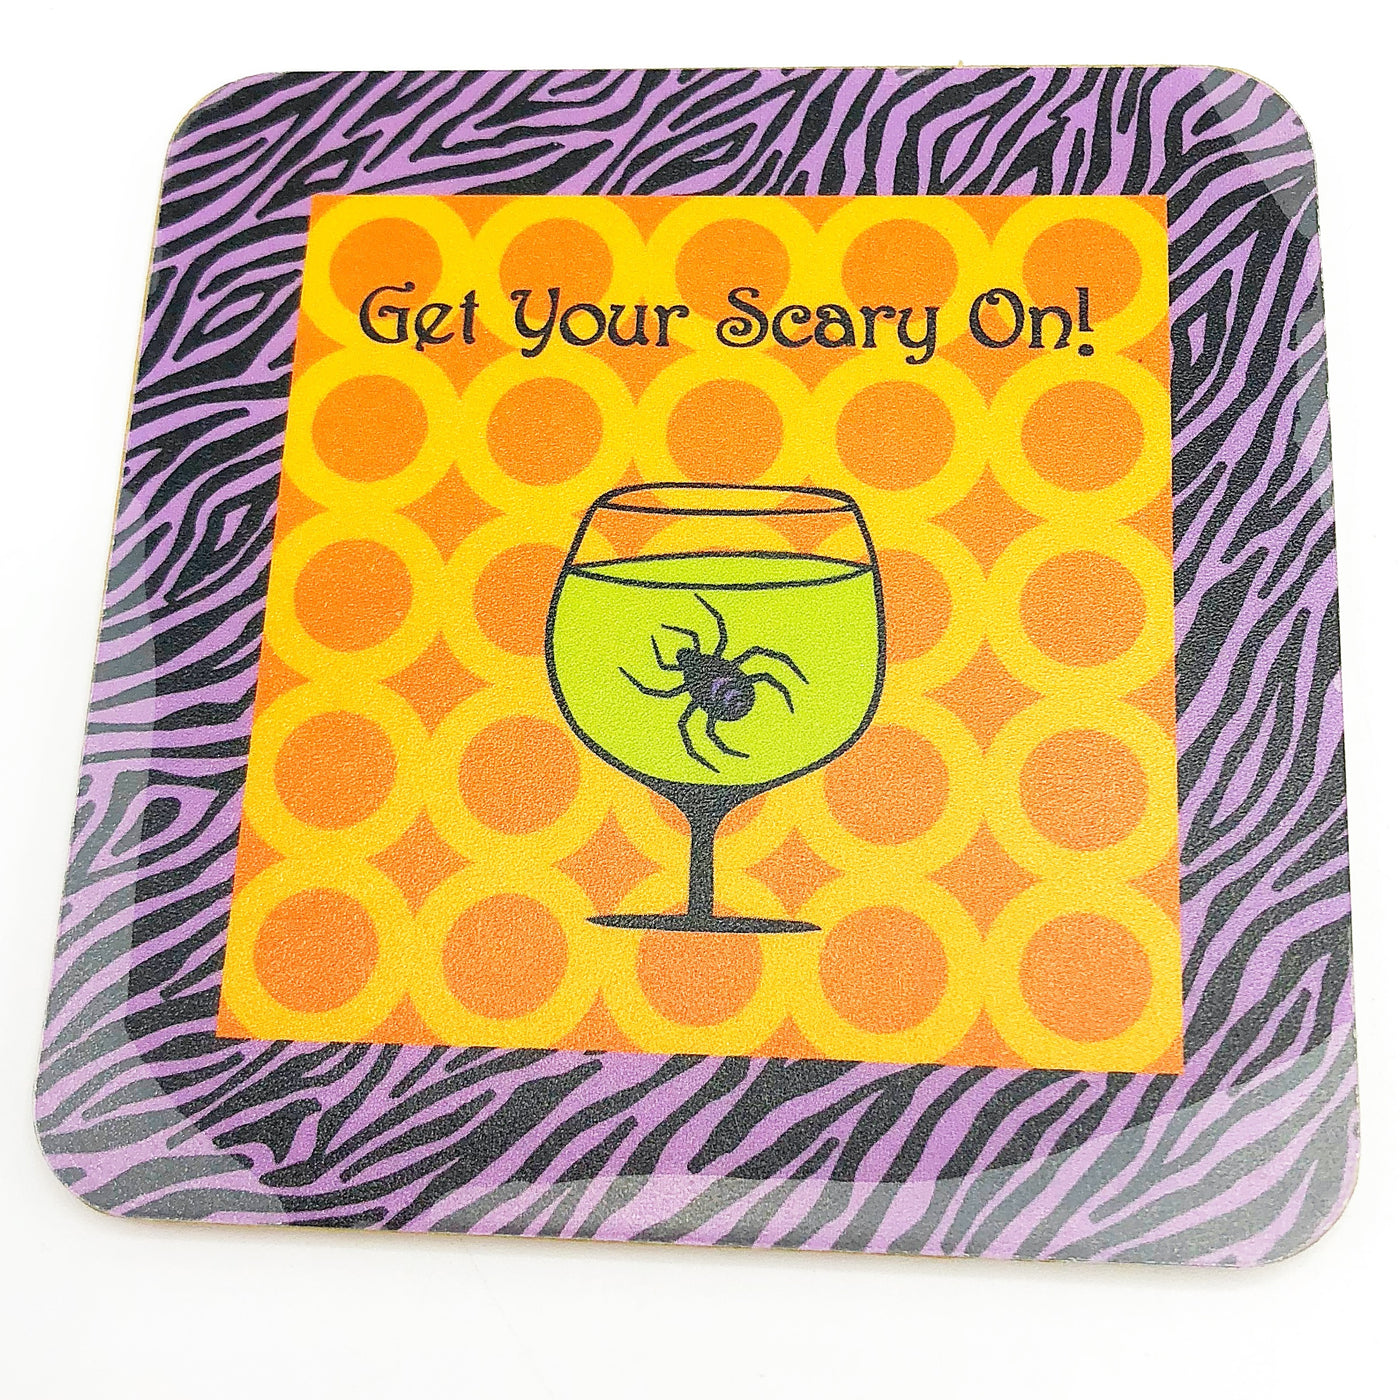 Set of 6 Get Your Scary On! Halloween Coasters